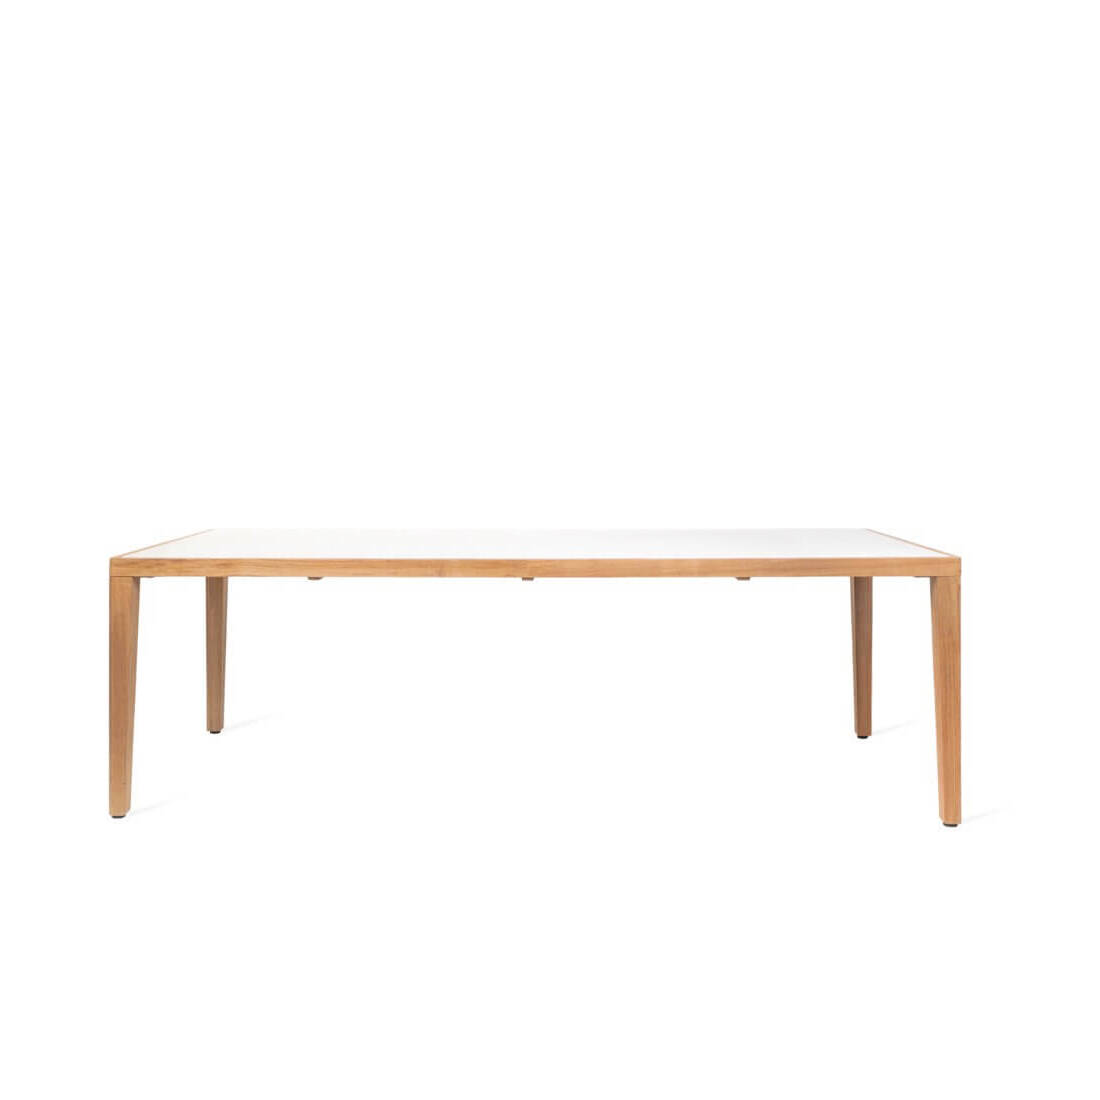 Vincent Sheppard VOLTA dining table